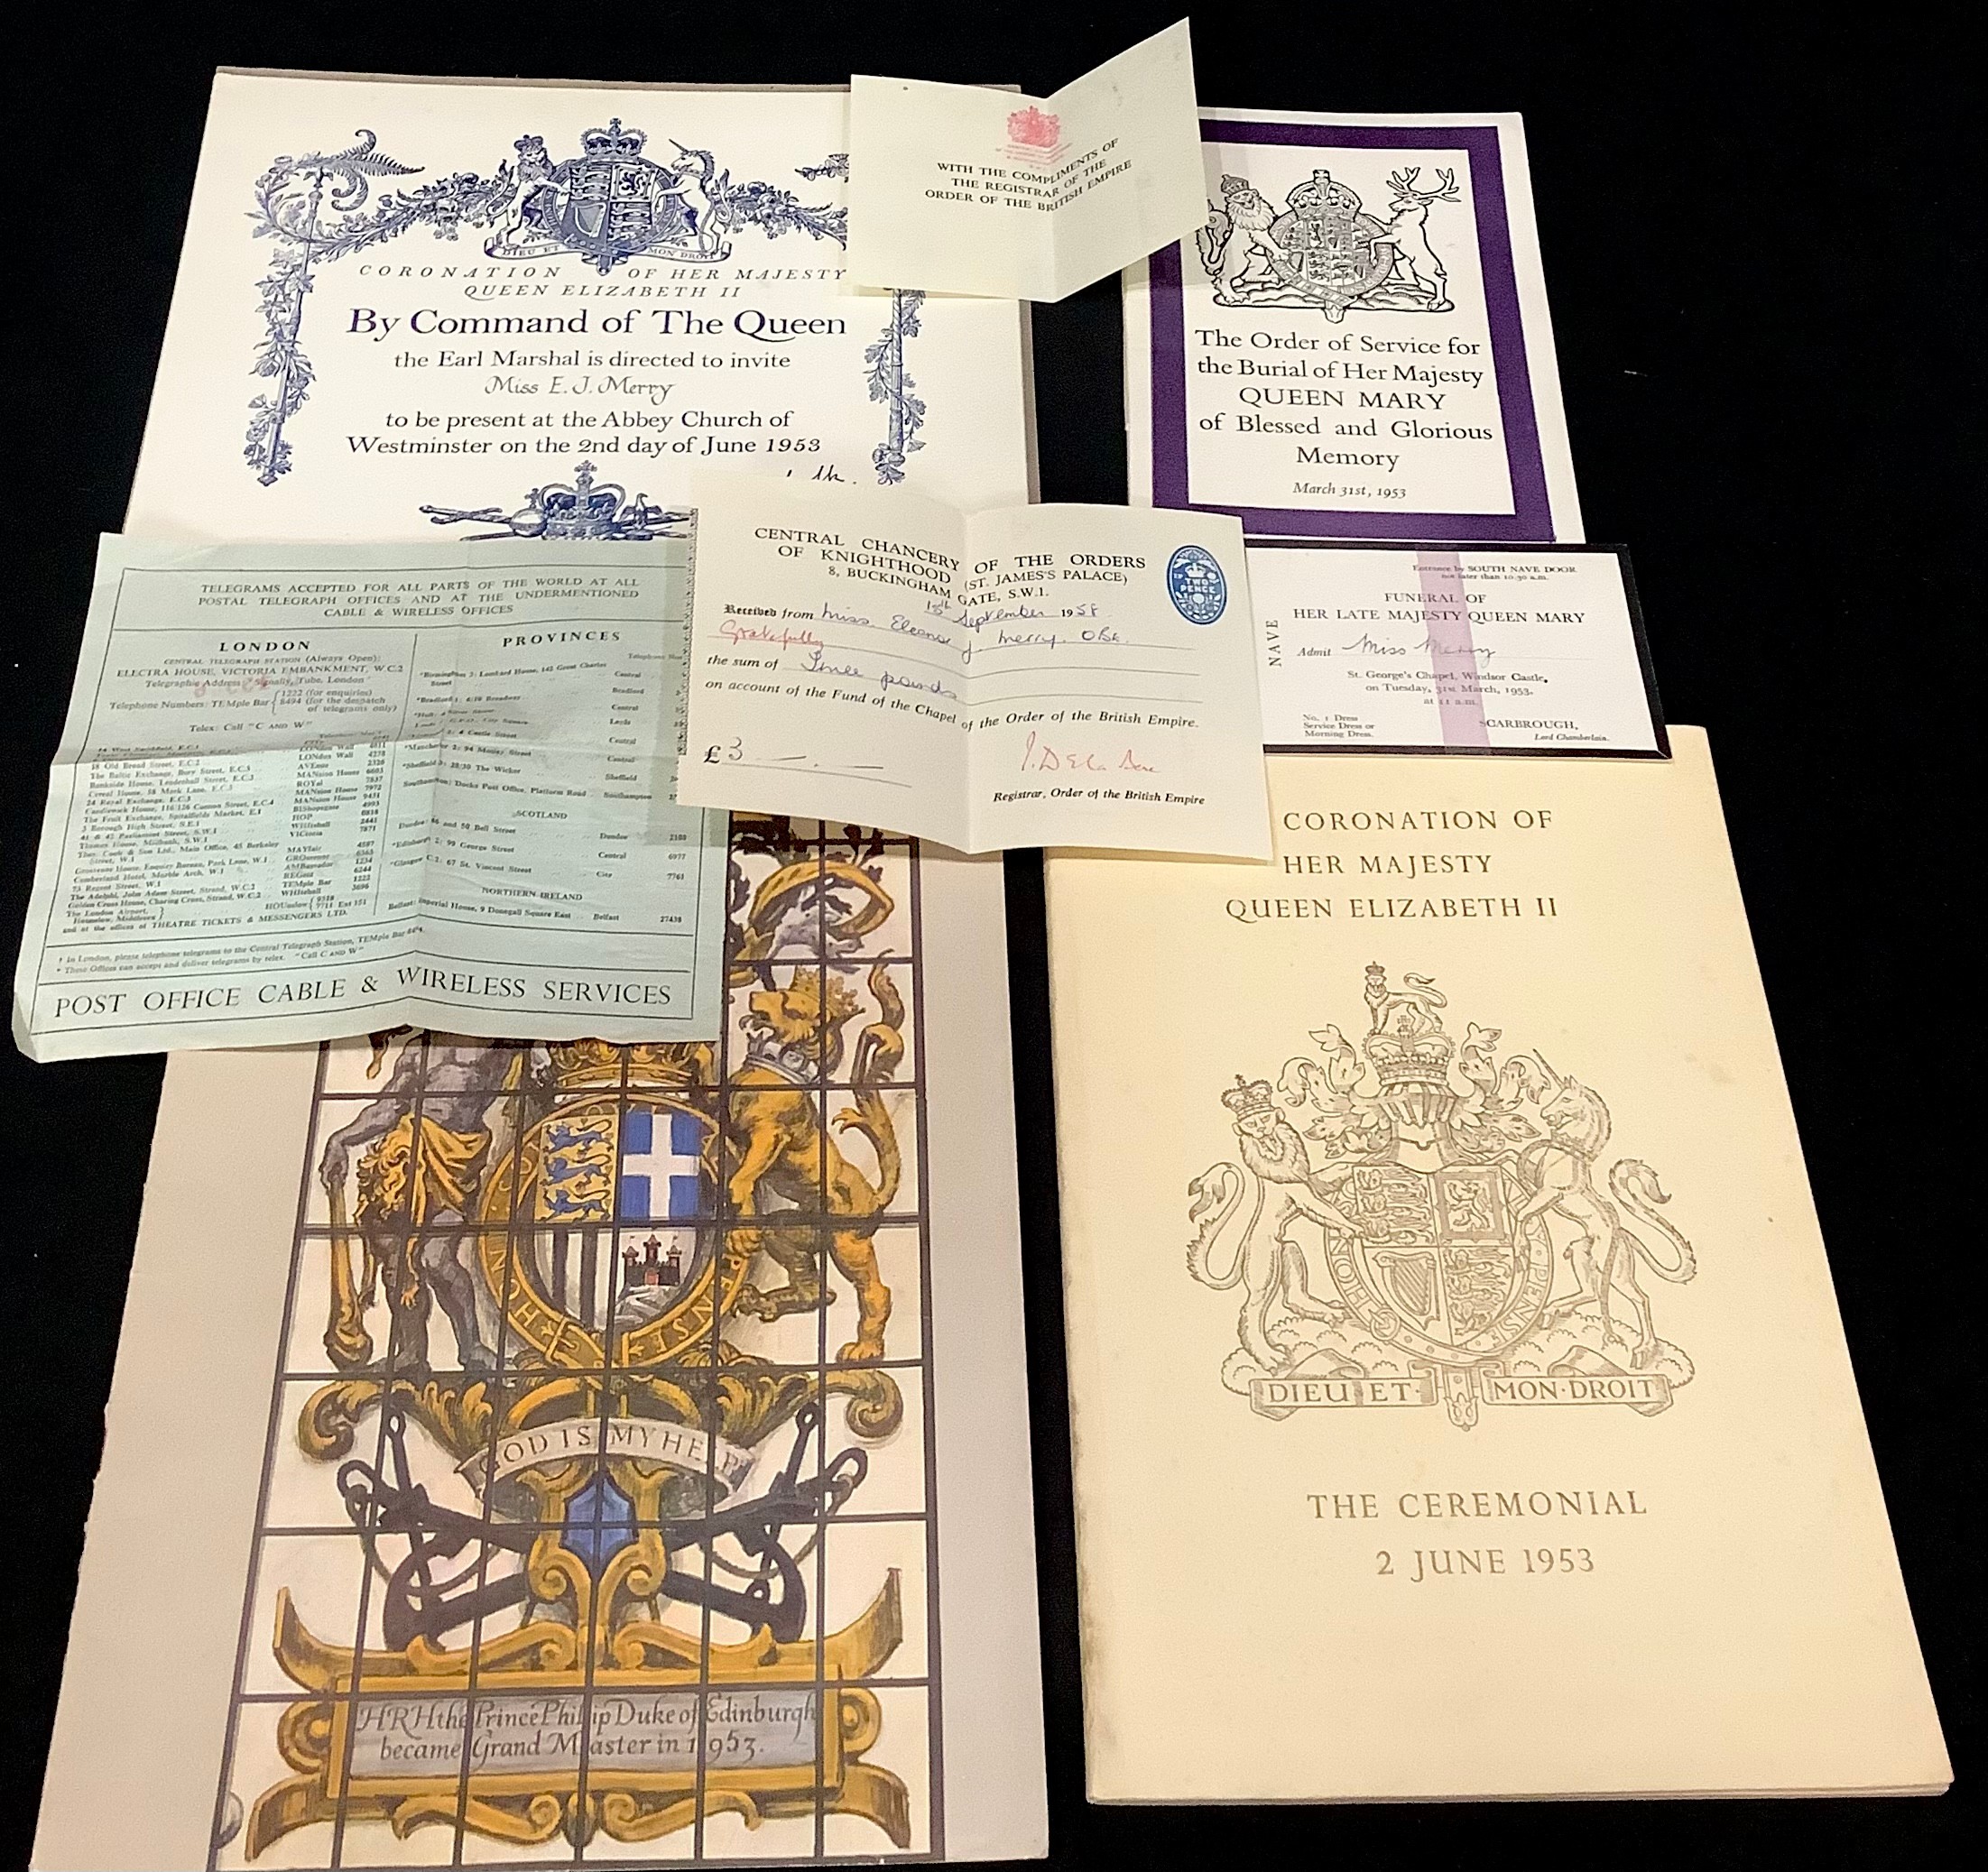 Royal Memorabilia - an invitation to the Funeral of Her Majesty Queen Mary, an Order of Service,